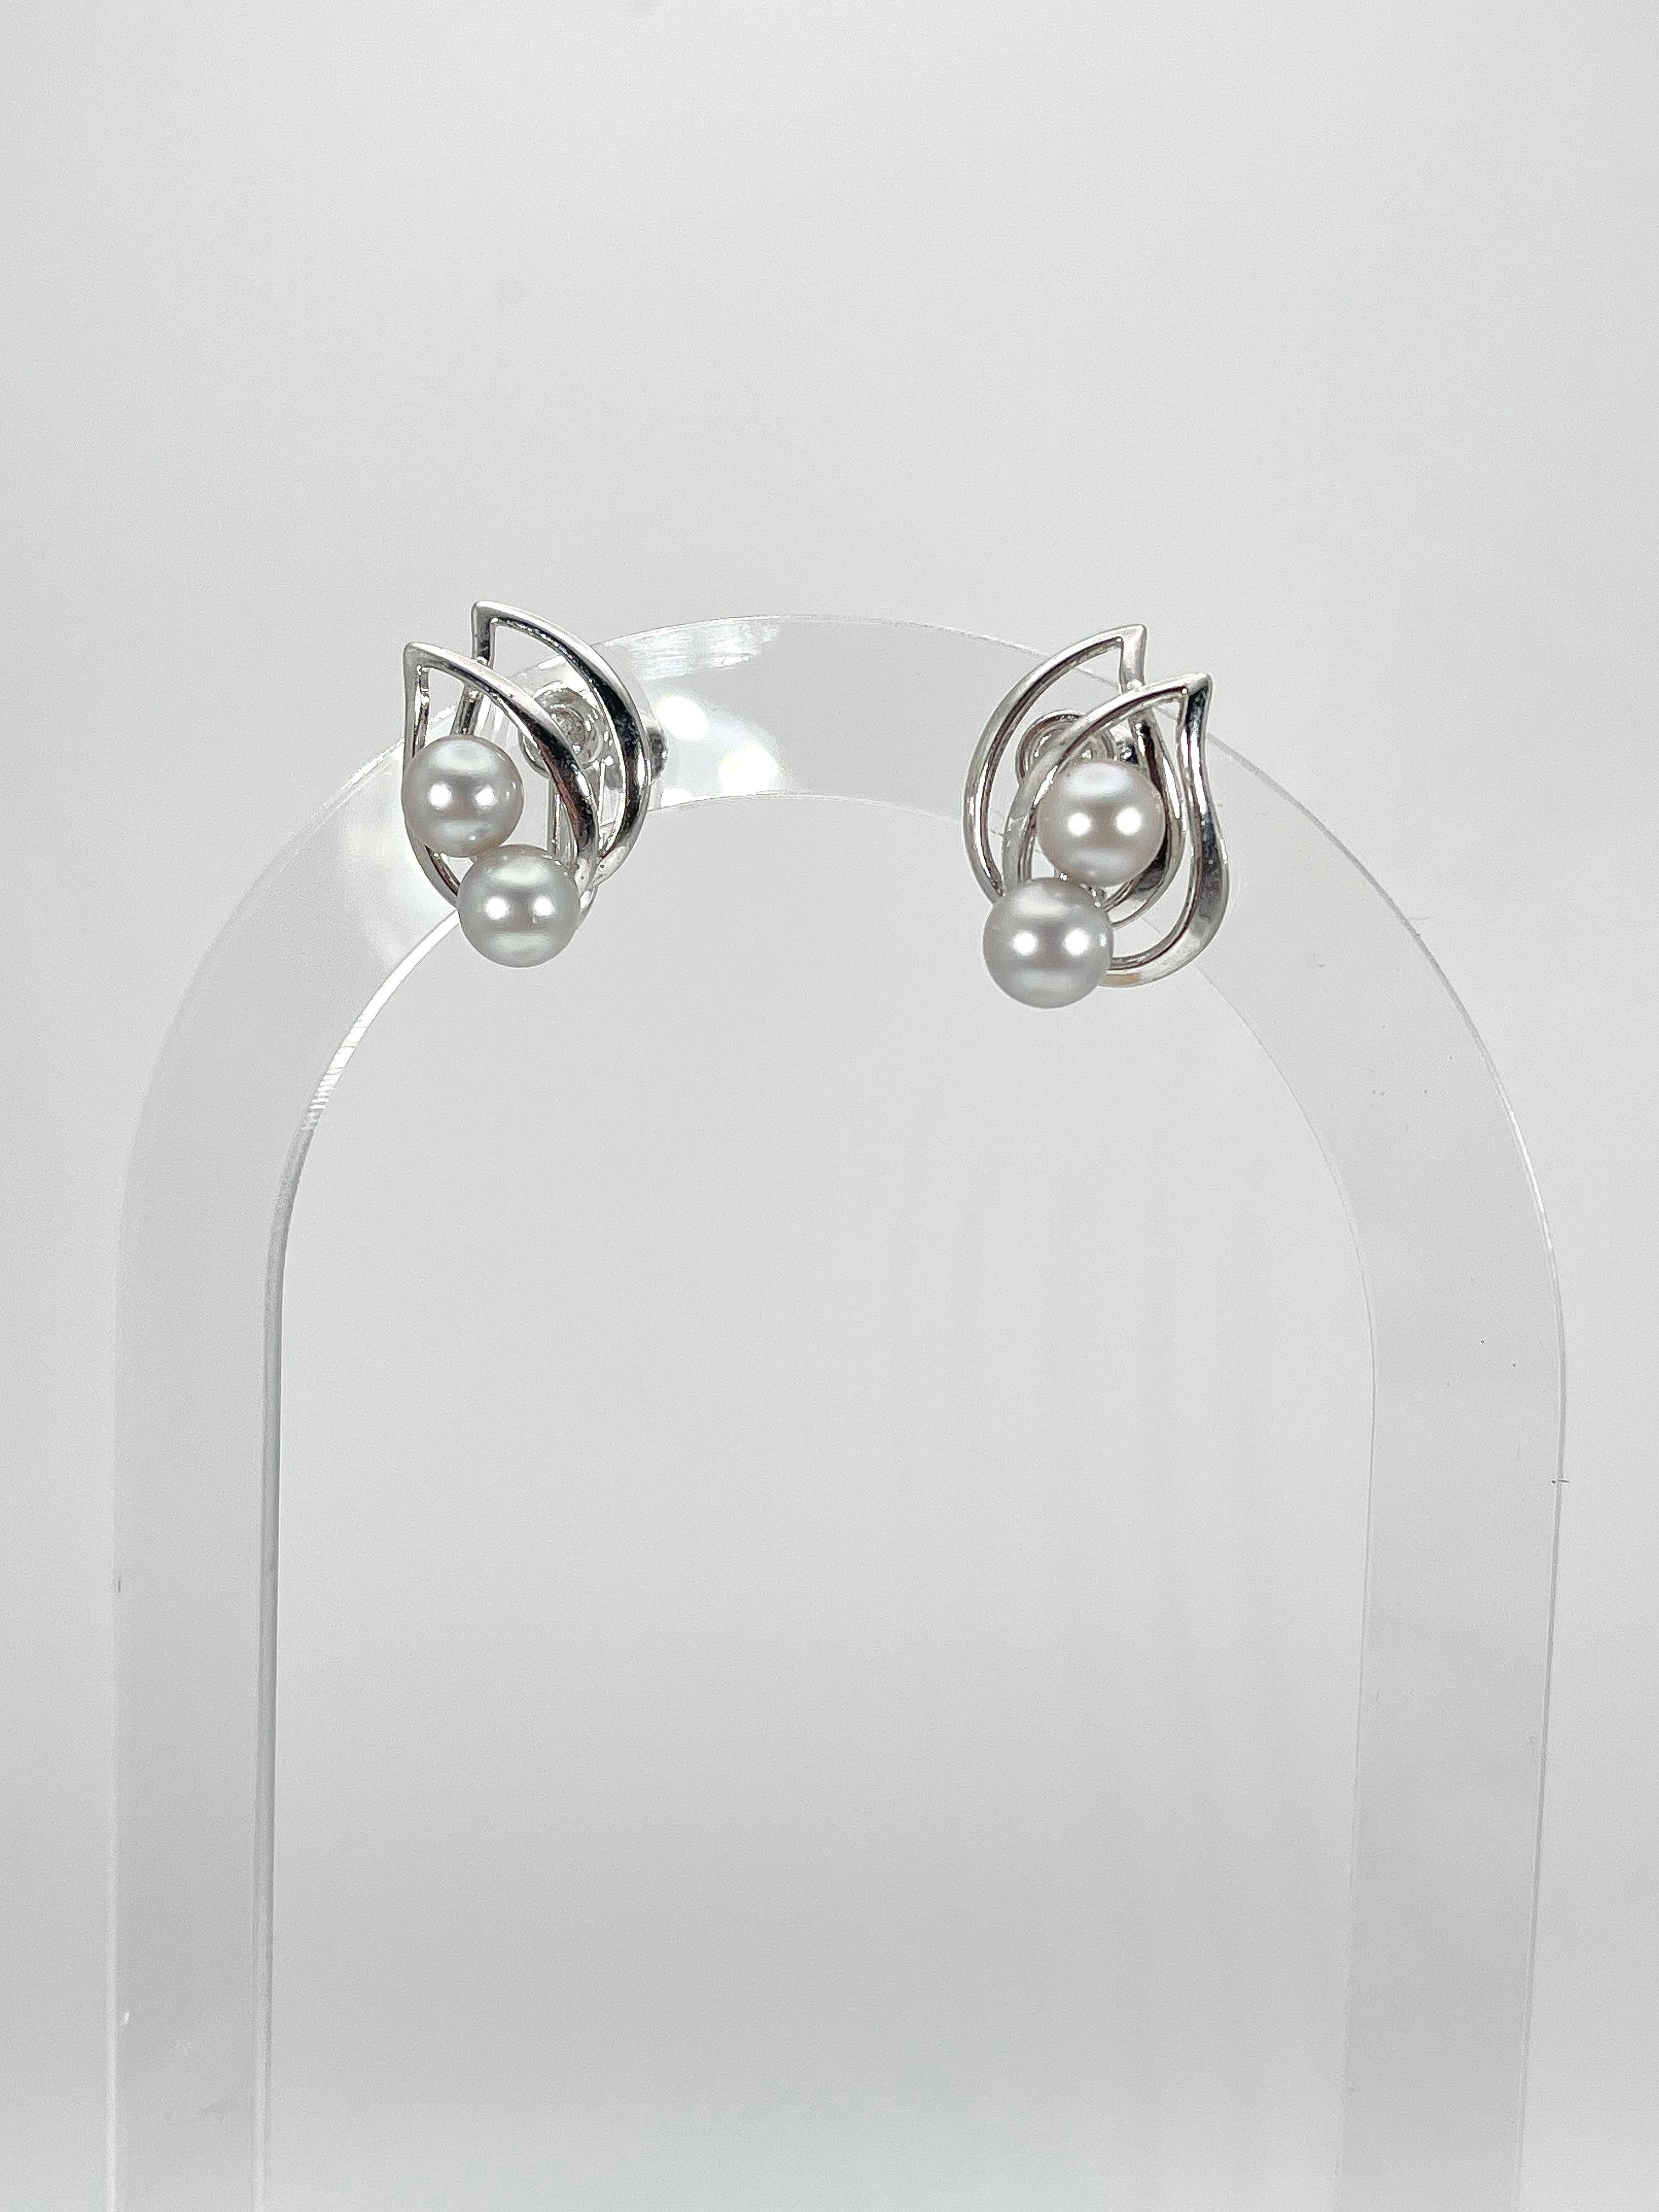 14k white gold double grey pearl and leaf design earrings. These earrings have a screw back for non pierced ears, the measurements of the earring are 14.2 x 18.2 mm, and the total weight of them is 5.13 grams. 